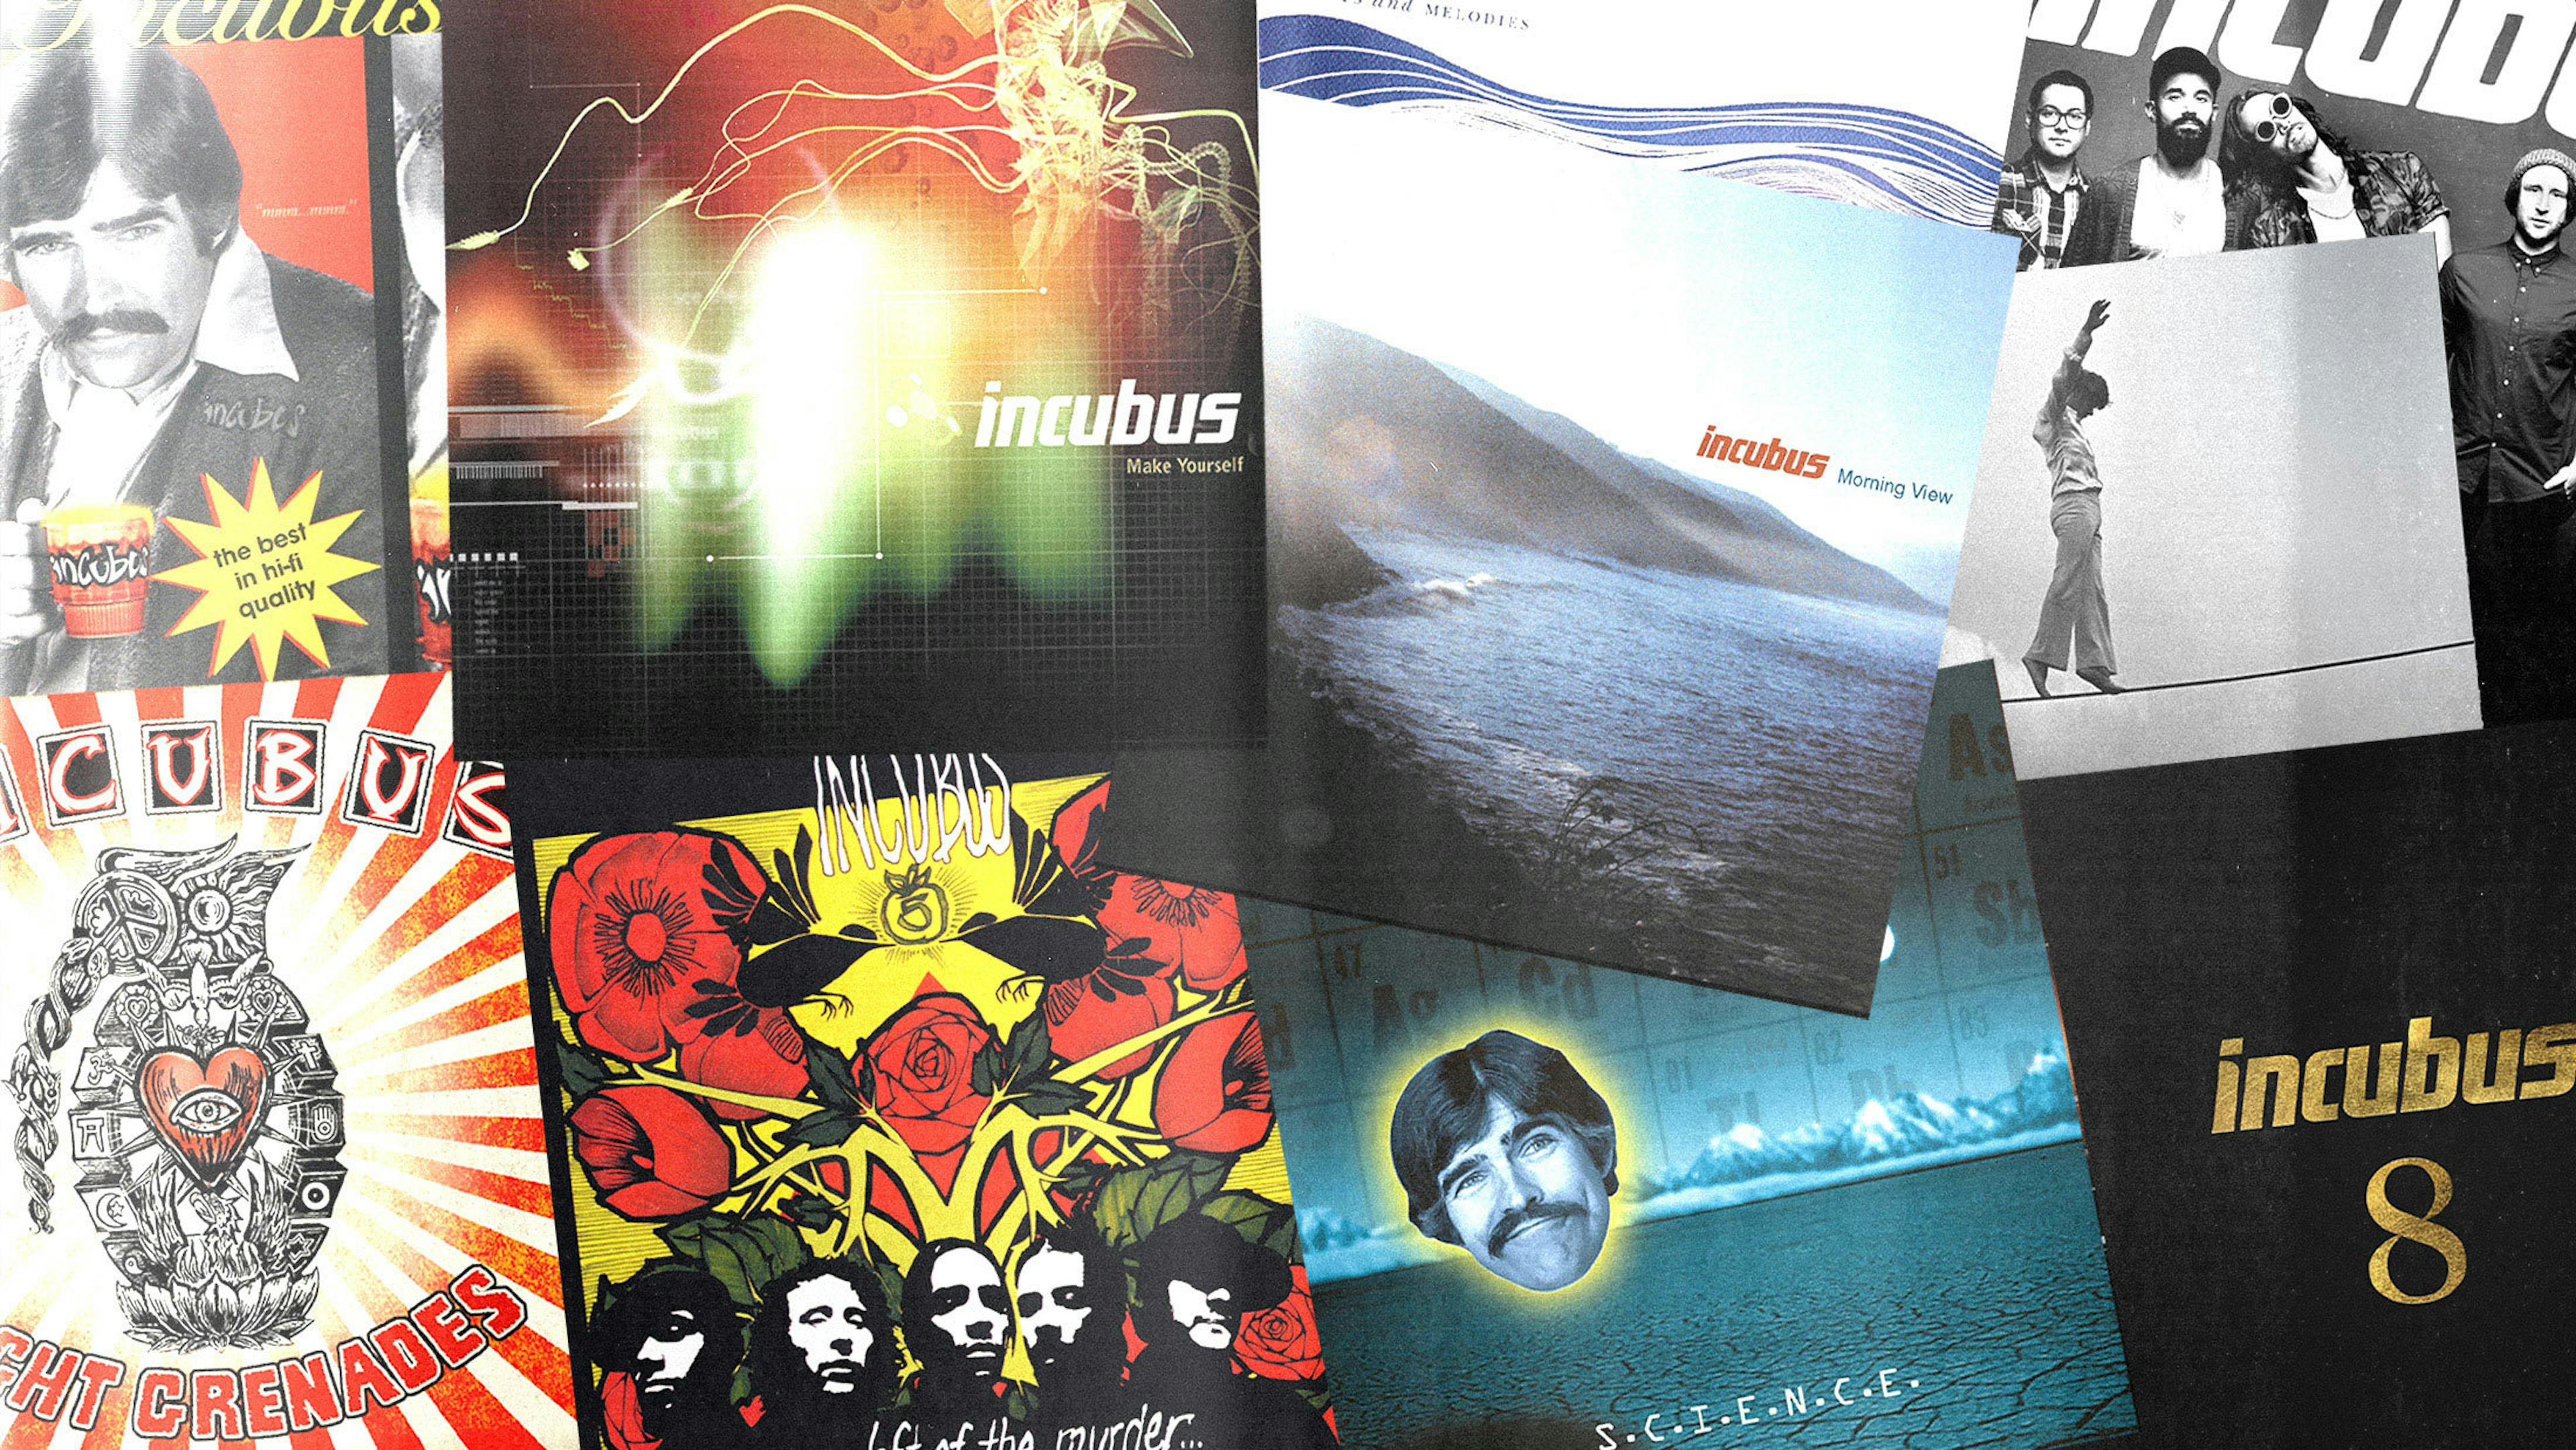 Incubus: Every album ranked from worst to best